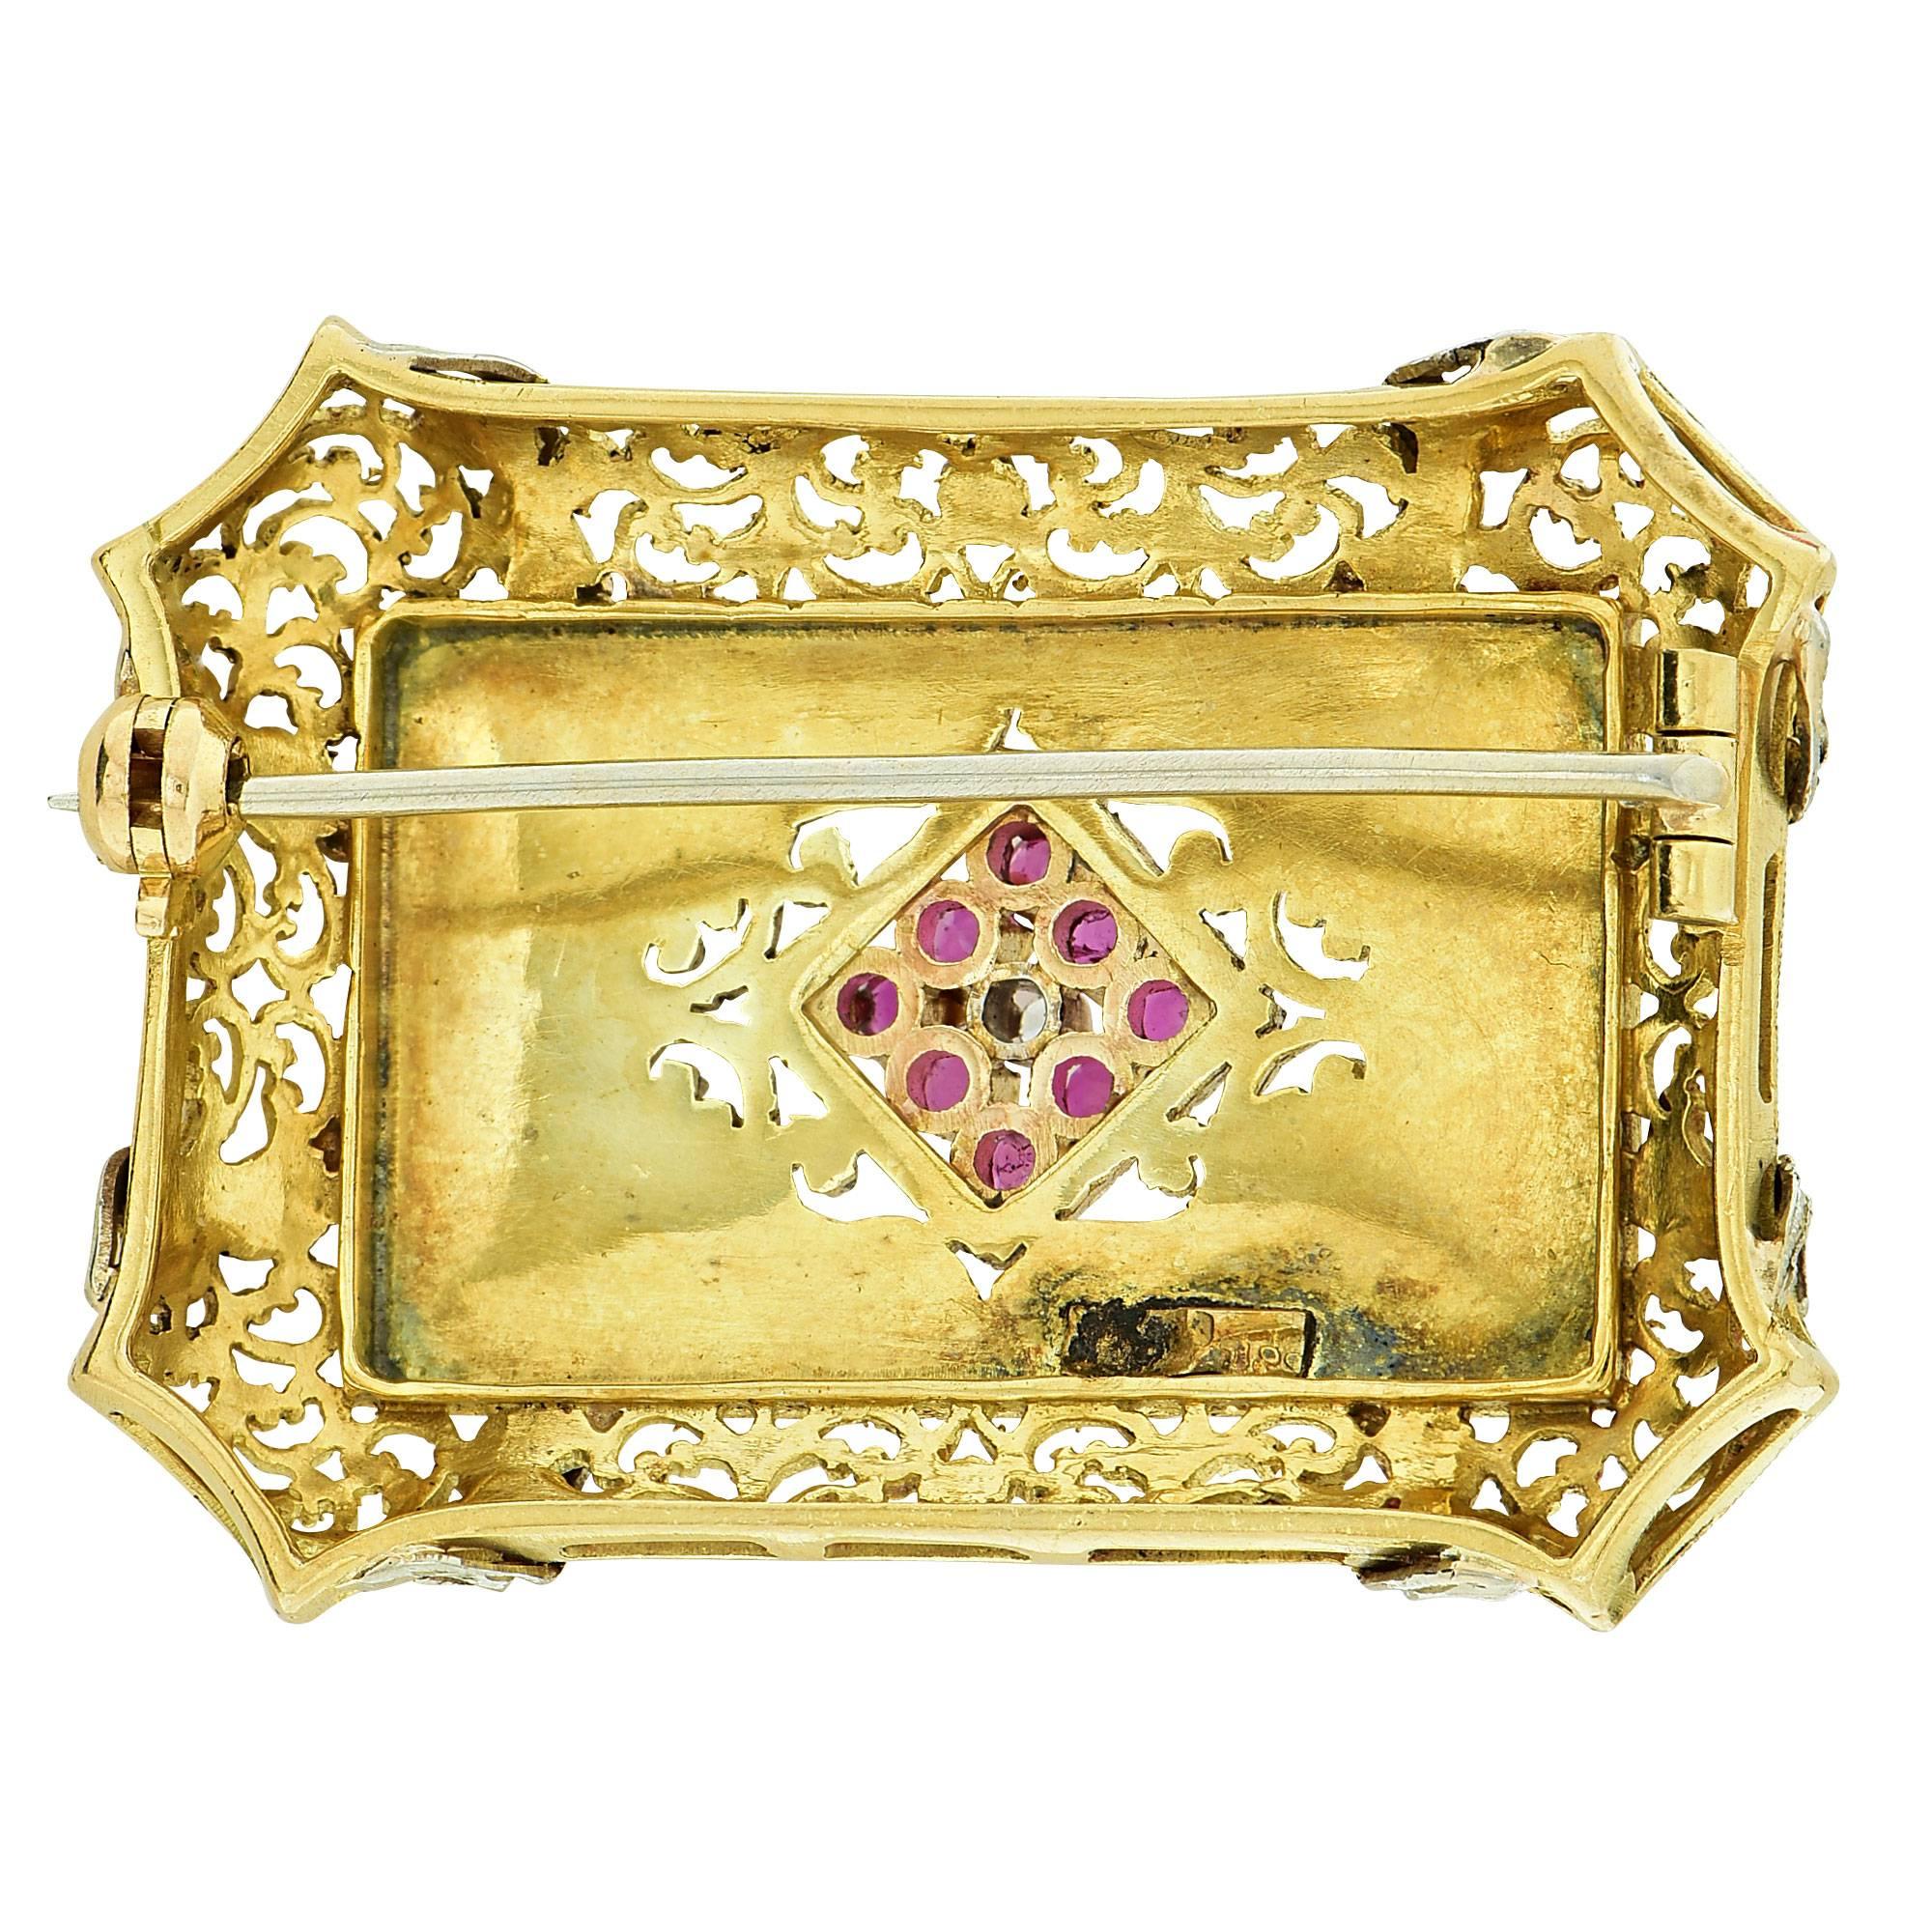 18k white and yellow gold brooch featuring 8 round rubies weighing .20cts total accented by a single cut diamond.

It is stamped and tested as 18k gold.
The metal weight is 13.99 grams.

This diamond and ruby brooch is accompanied by a retail